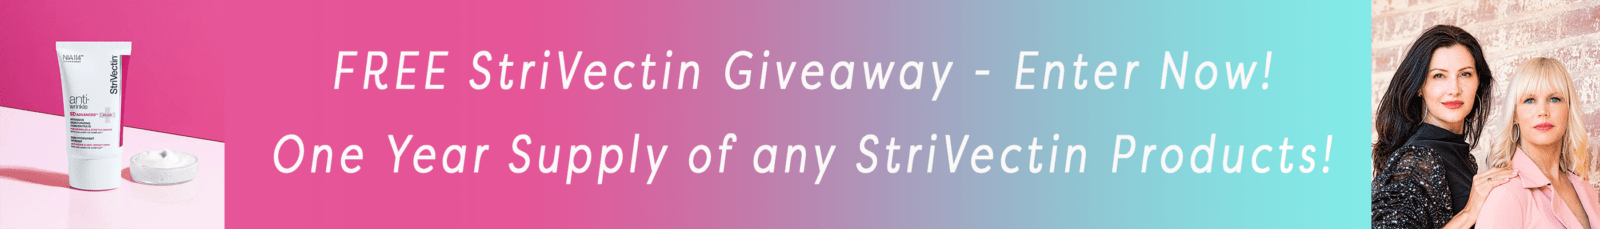 StriVectin Giveaway!